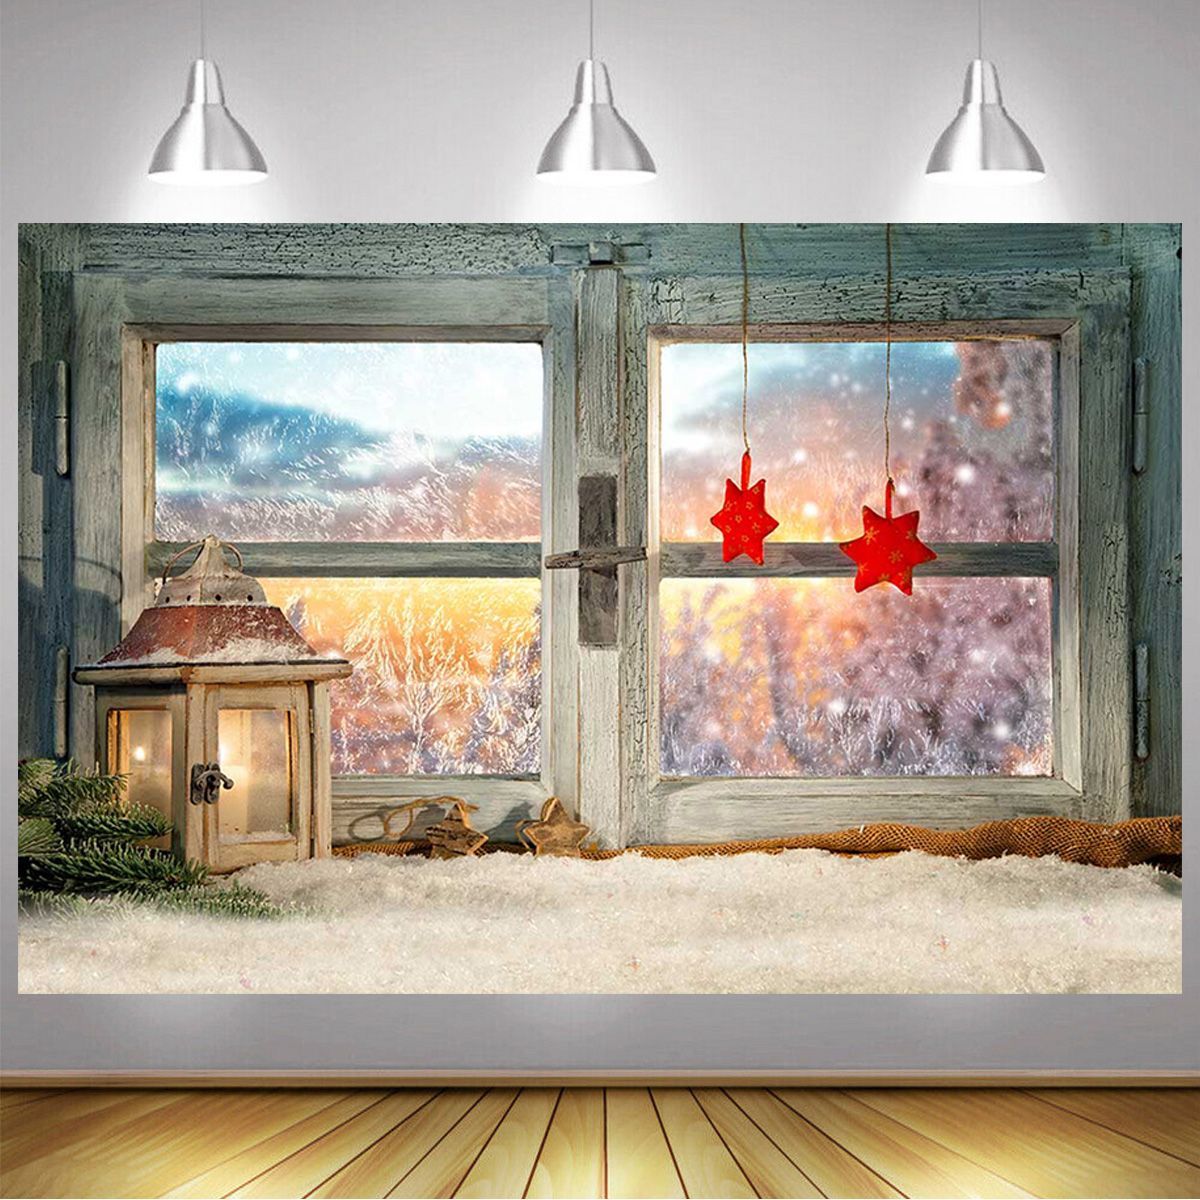 5x3FT-7x5FT-8x6FT-Christmas-Window-Star-Snow-Photography-Backdrop-Background-Studio-Prop-1610113